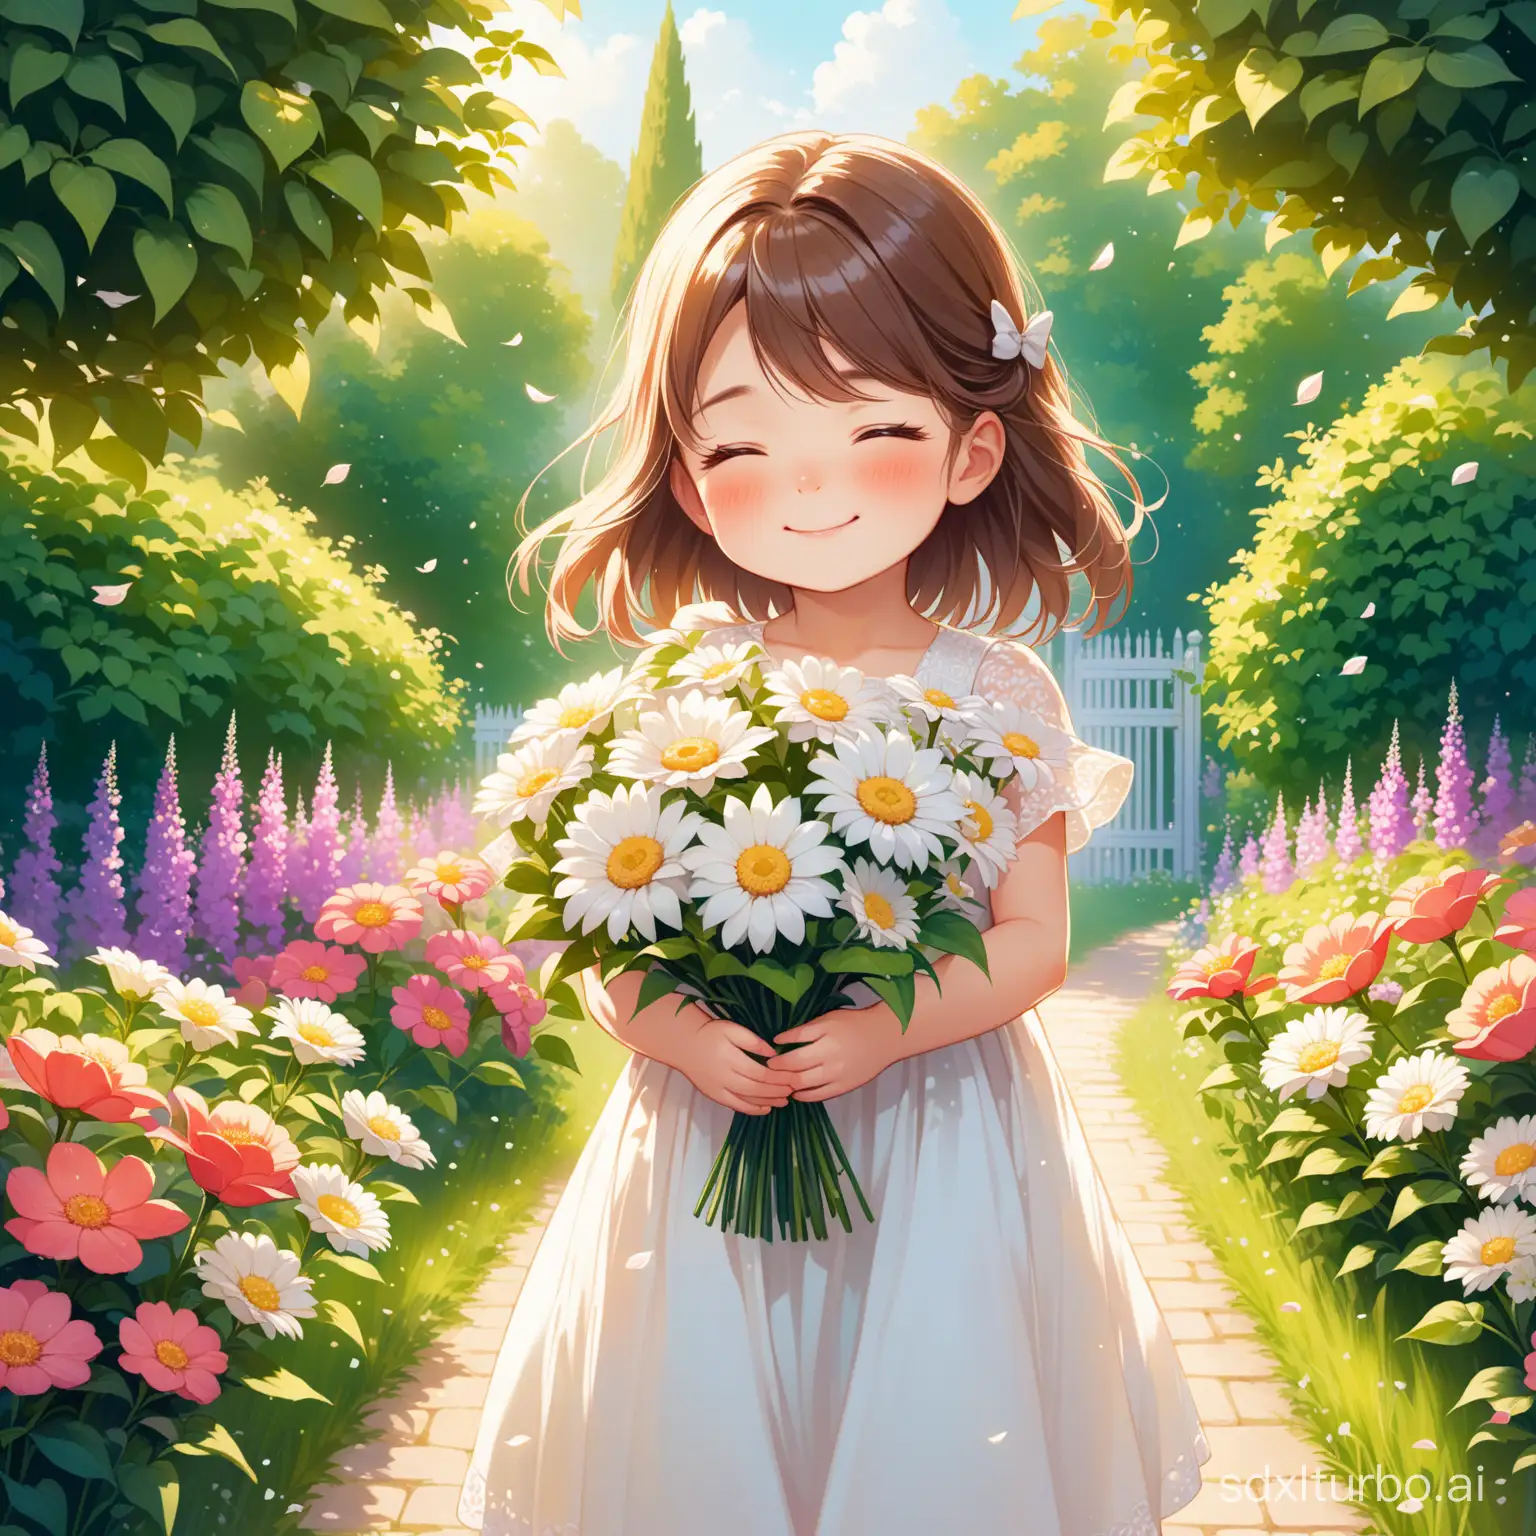 The little girl holding a bouquet in her arms under the gaze, squinting and smiling, wearing a white dress, with a garden behind her, more flowers, less paths